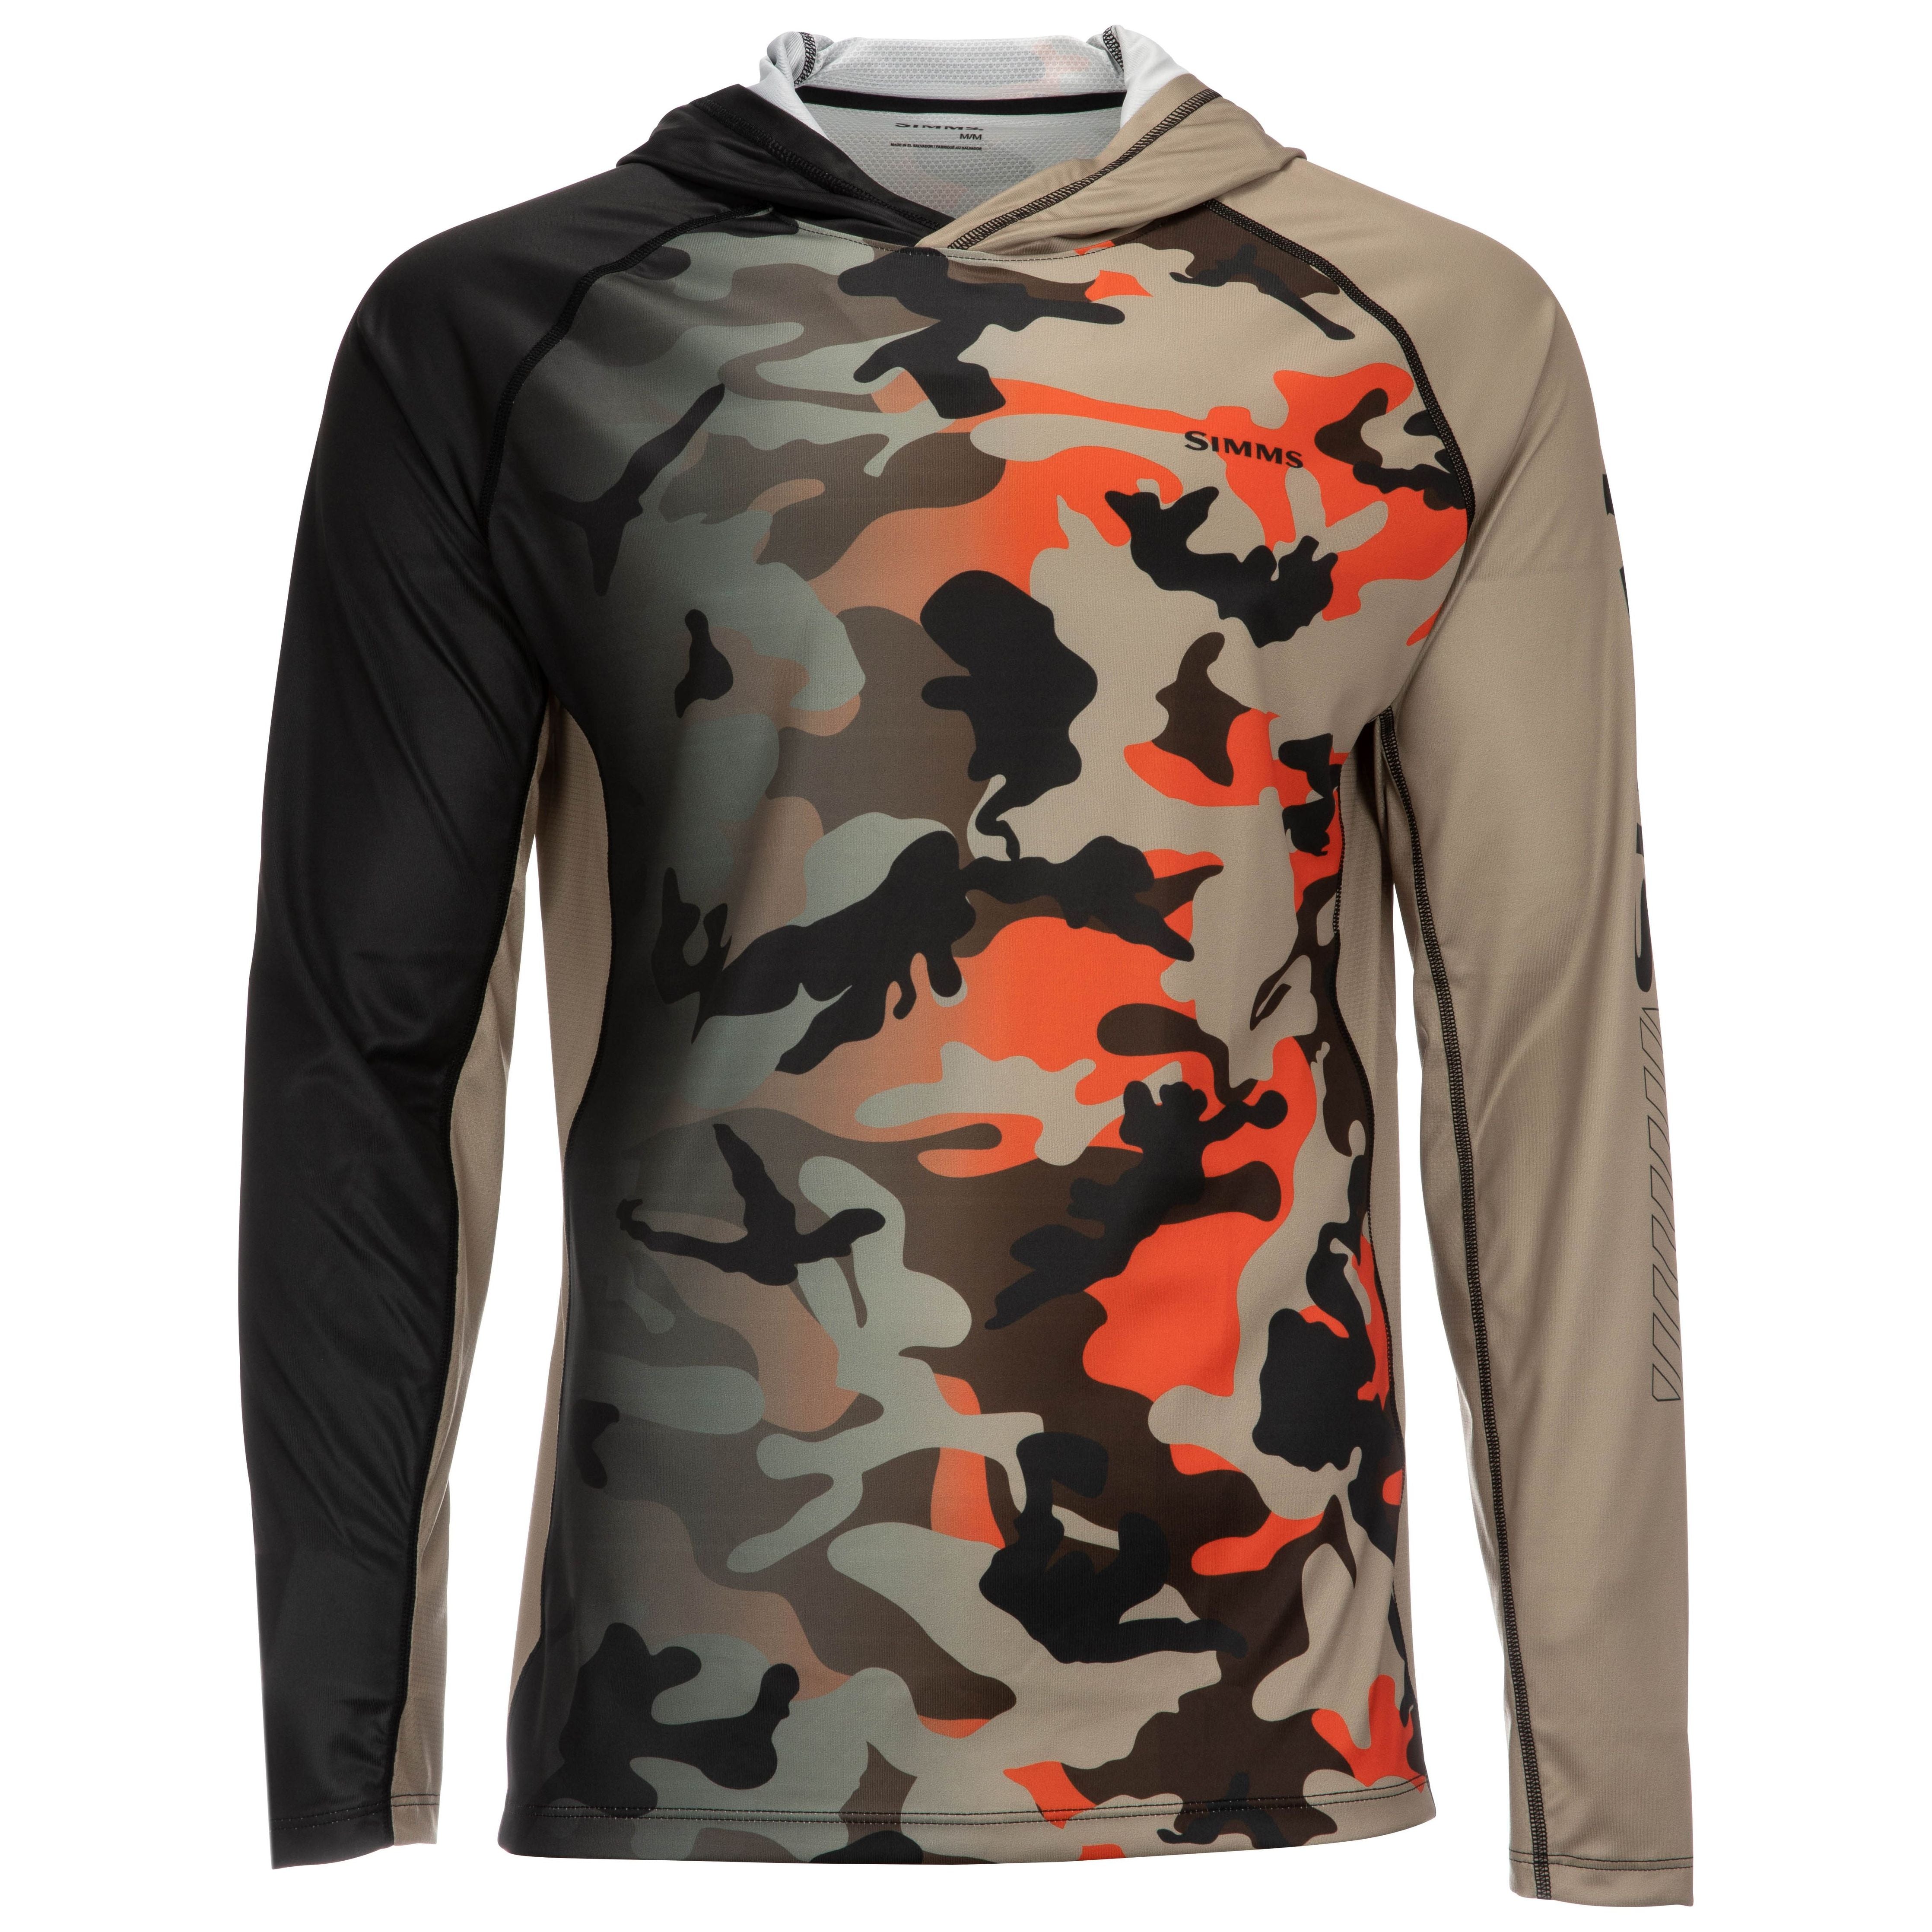 Simms SolarVent Hoody - Pro Woodland Camo Flame Image 01